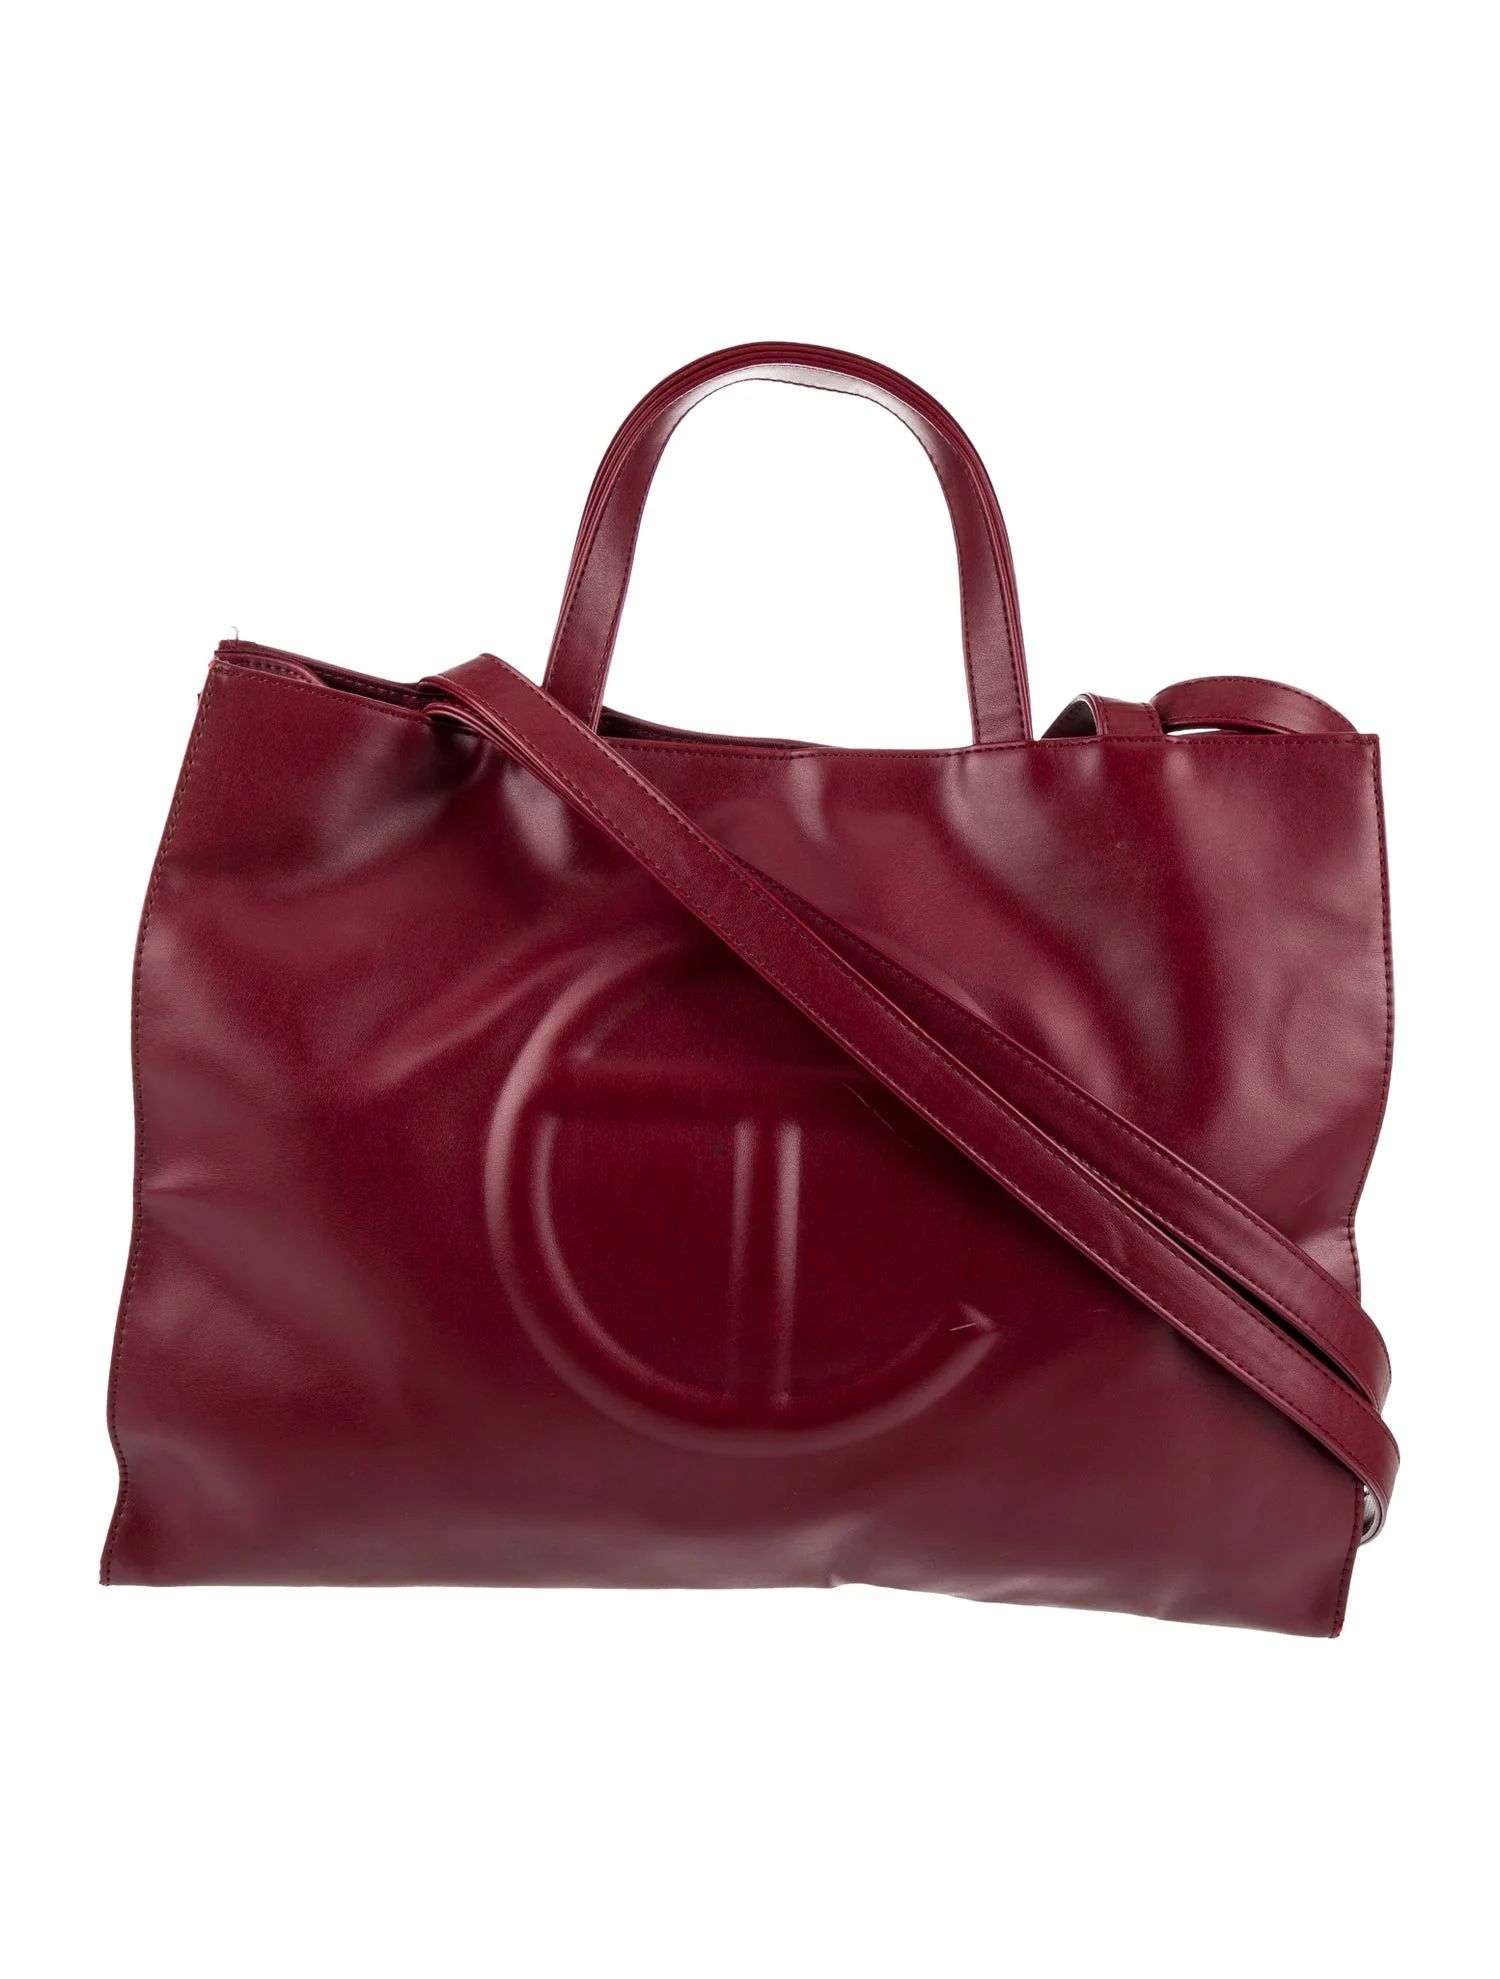 Medium 'Oxblood' Shopping Tote | The RealReal